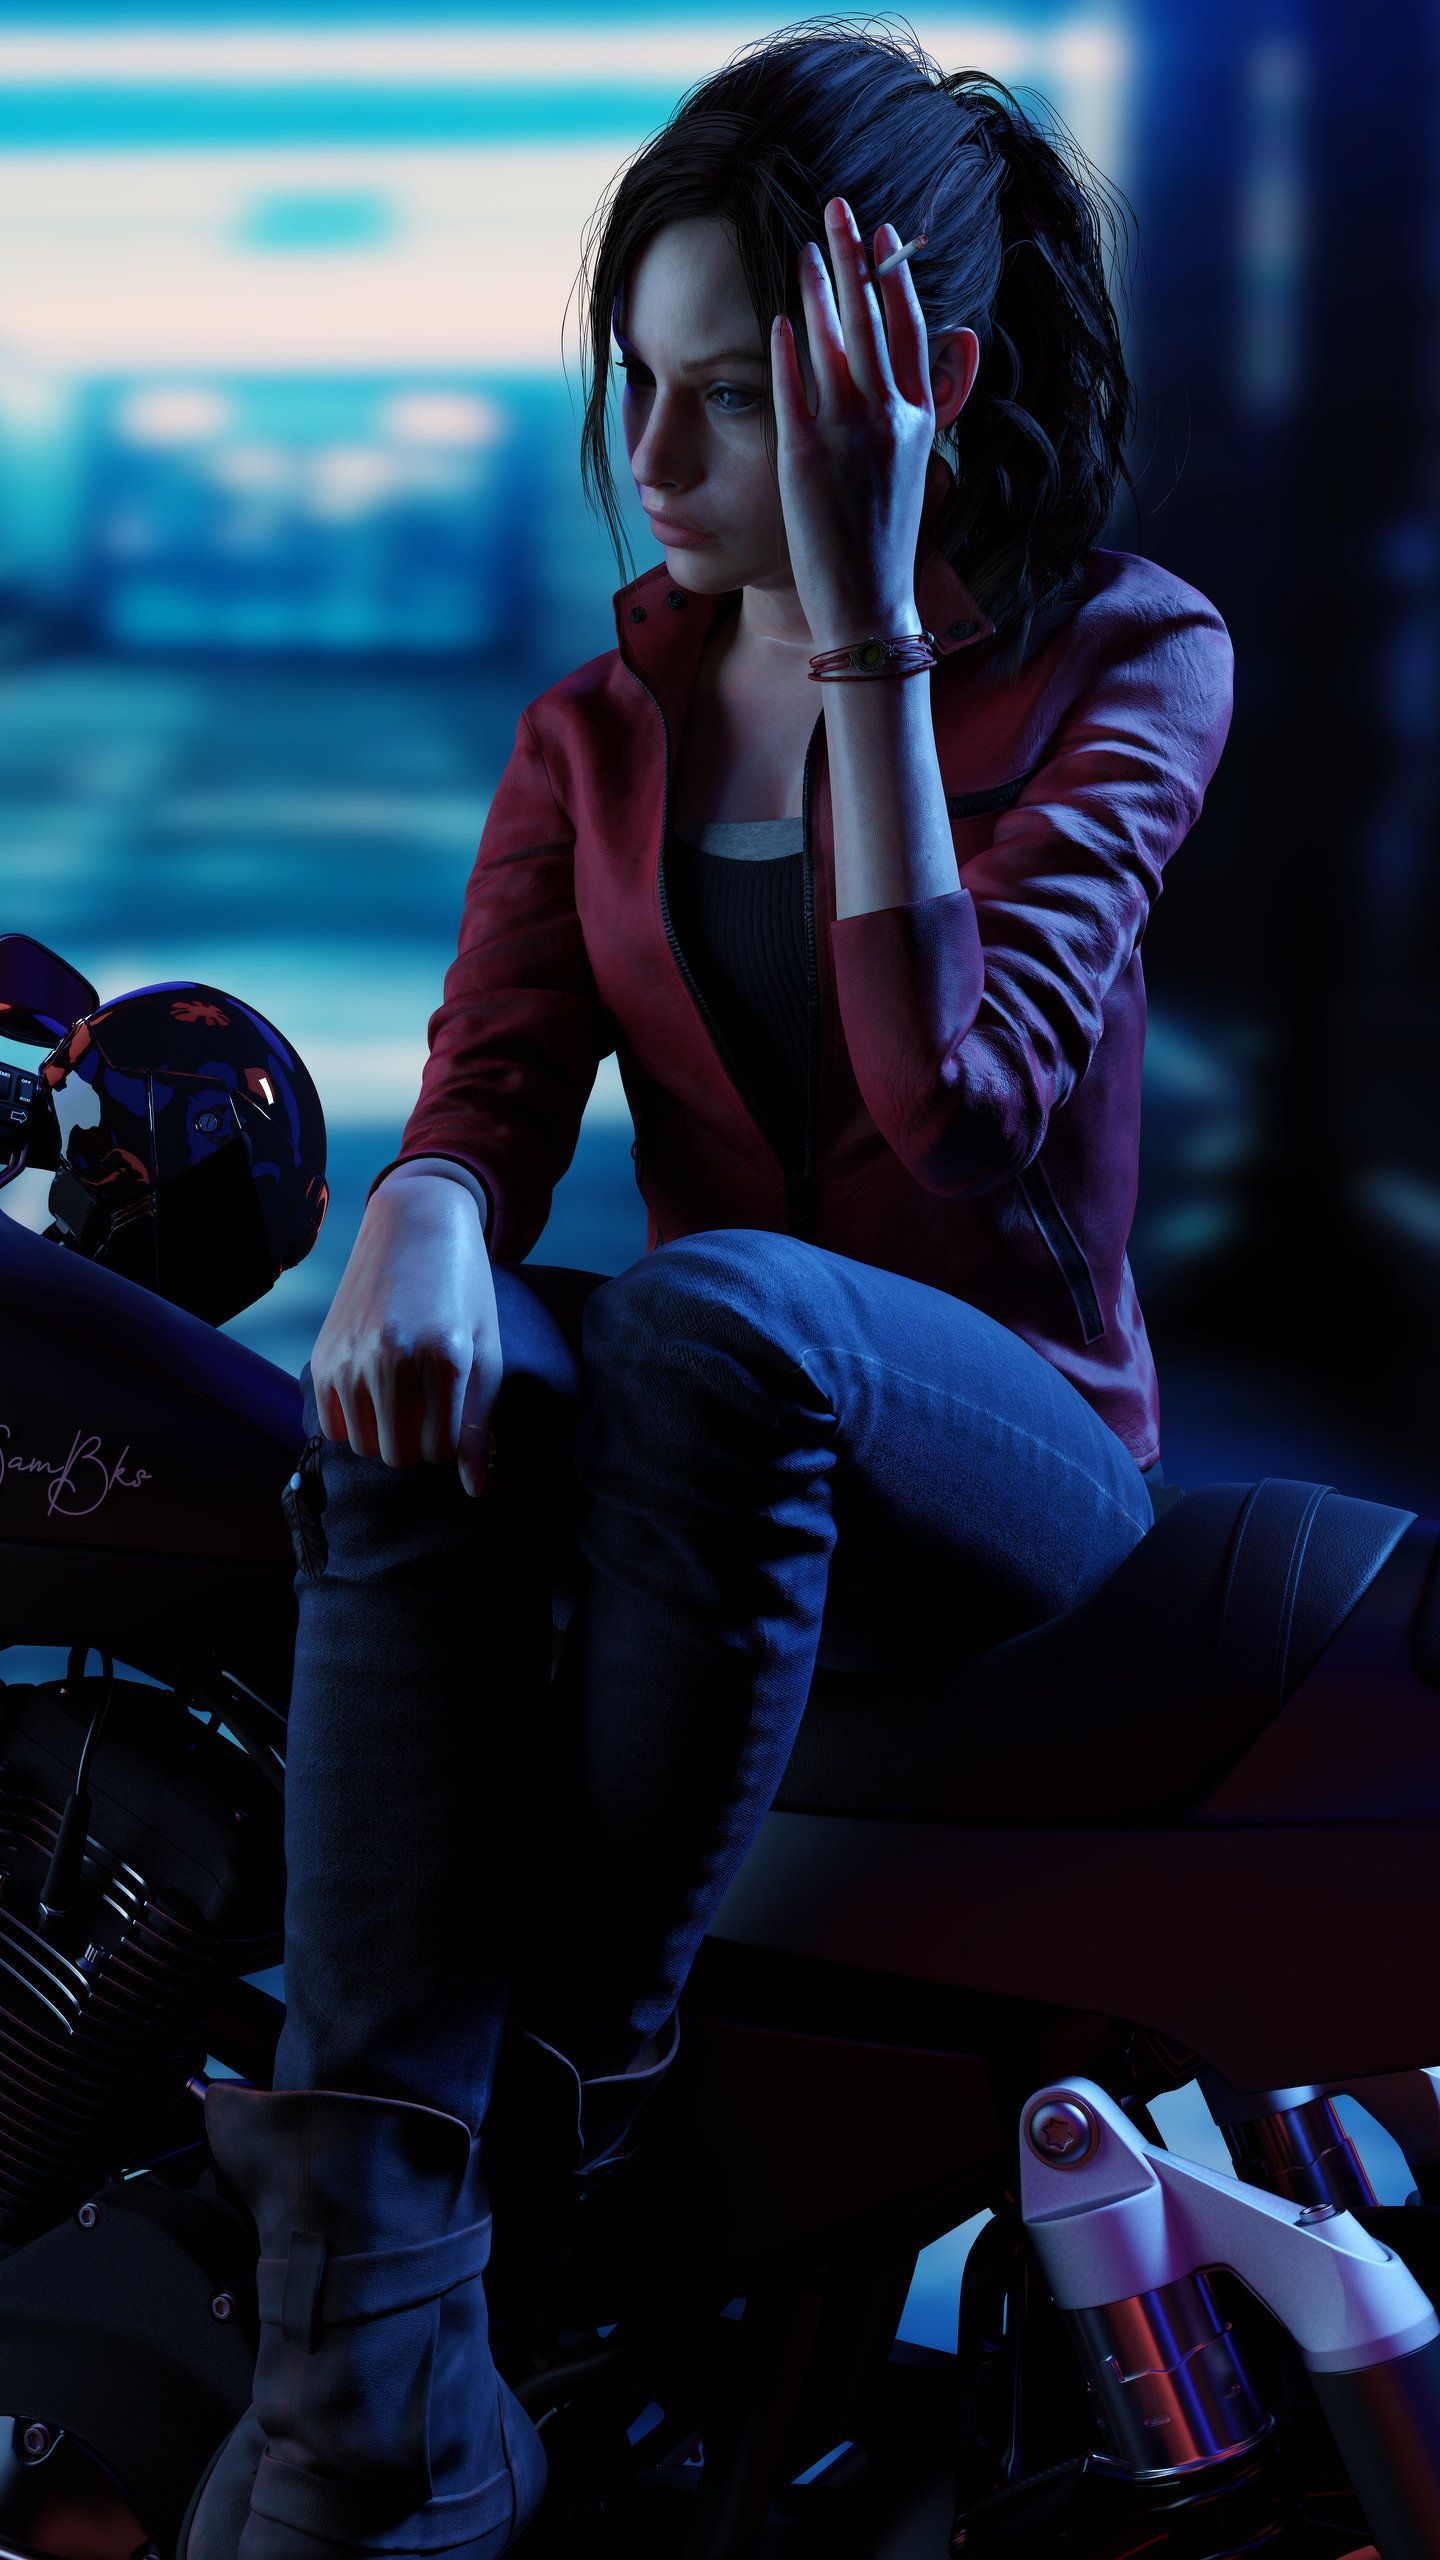 Resident Evil 2 Claire Redfield 5K HD Wallpaper. Resident evil girl, Resident evil, Resident evil game